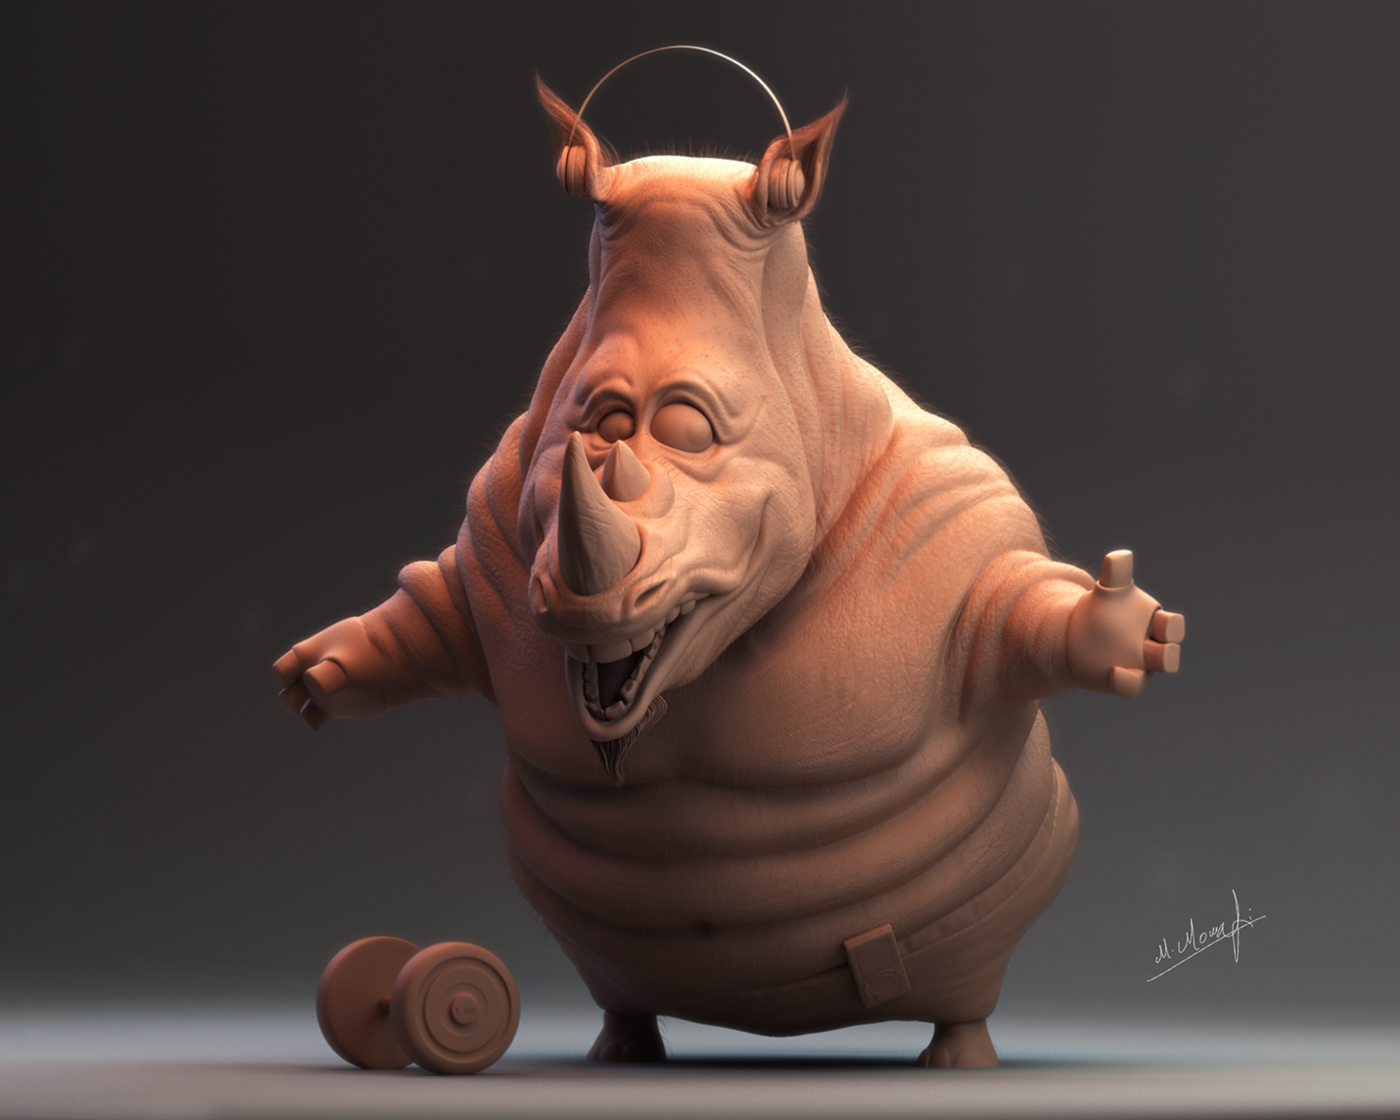 gym 3ds max cartoon characters creatures Fun concept Rhinoceros Zbrush design